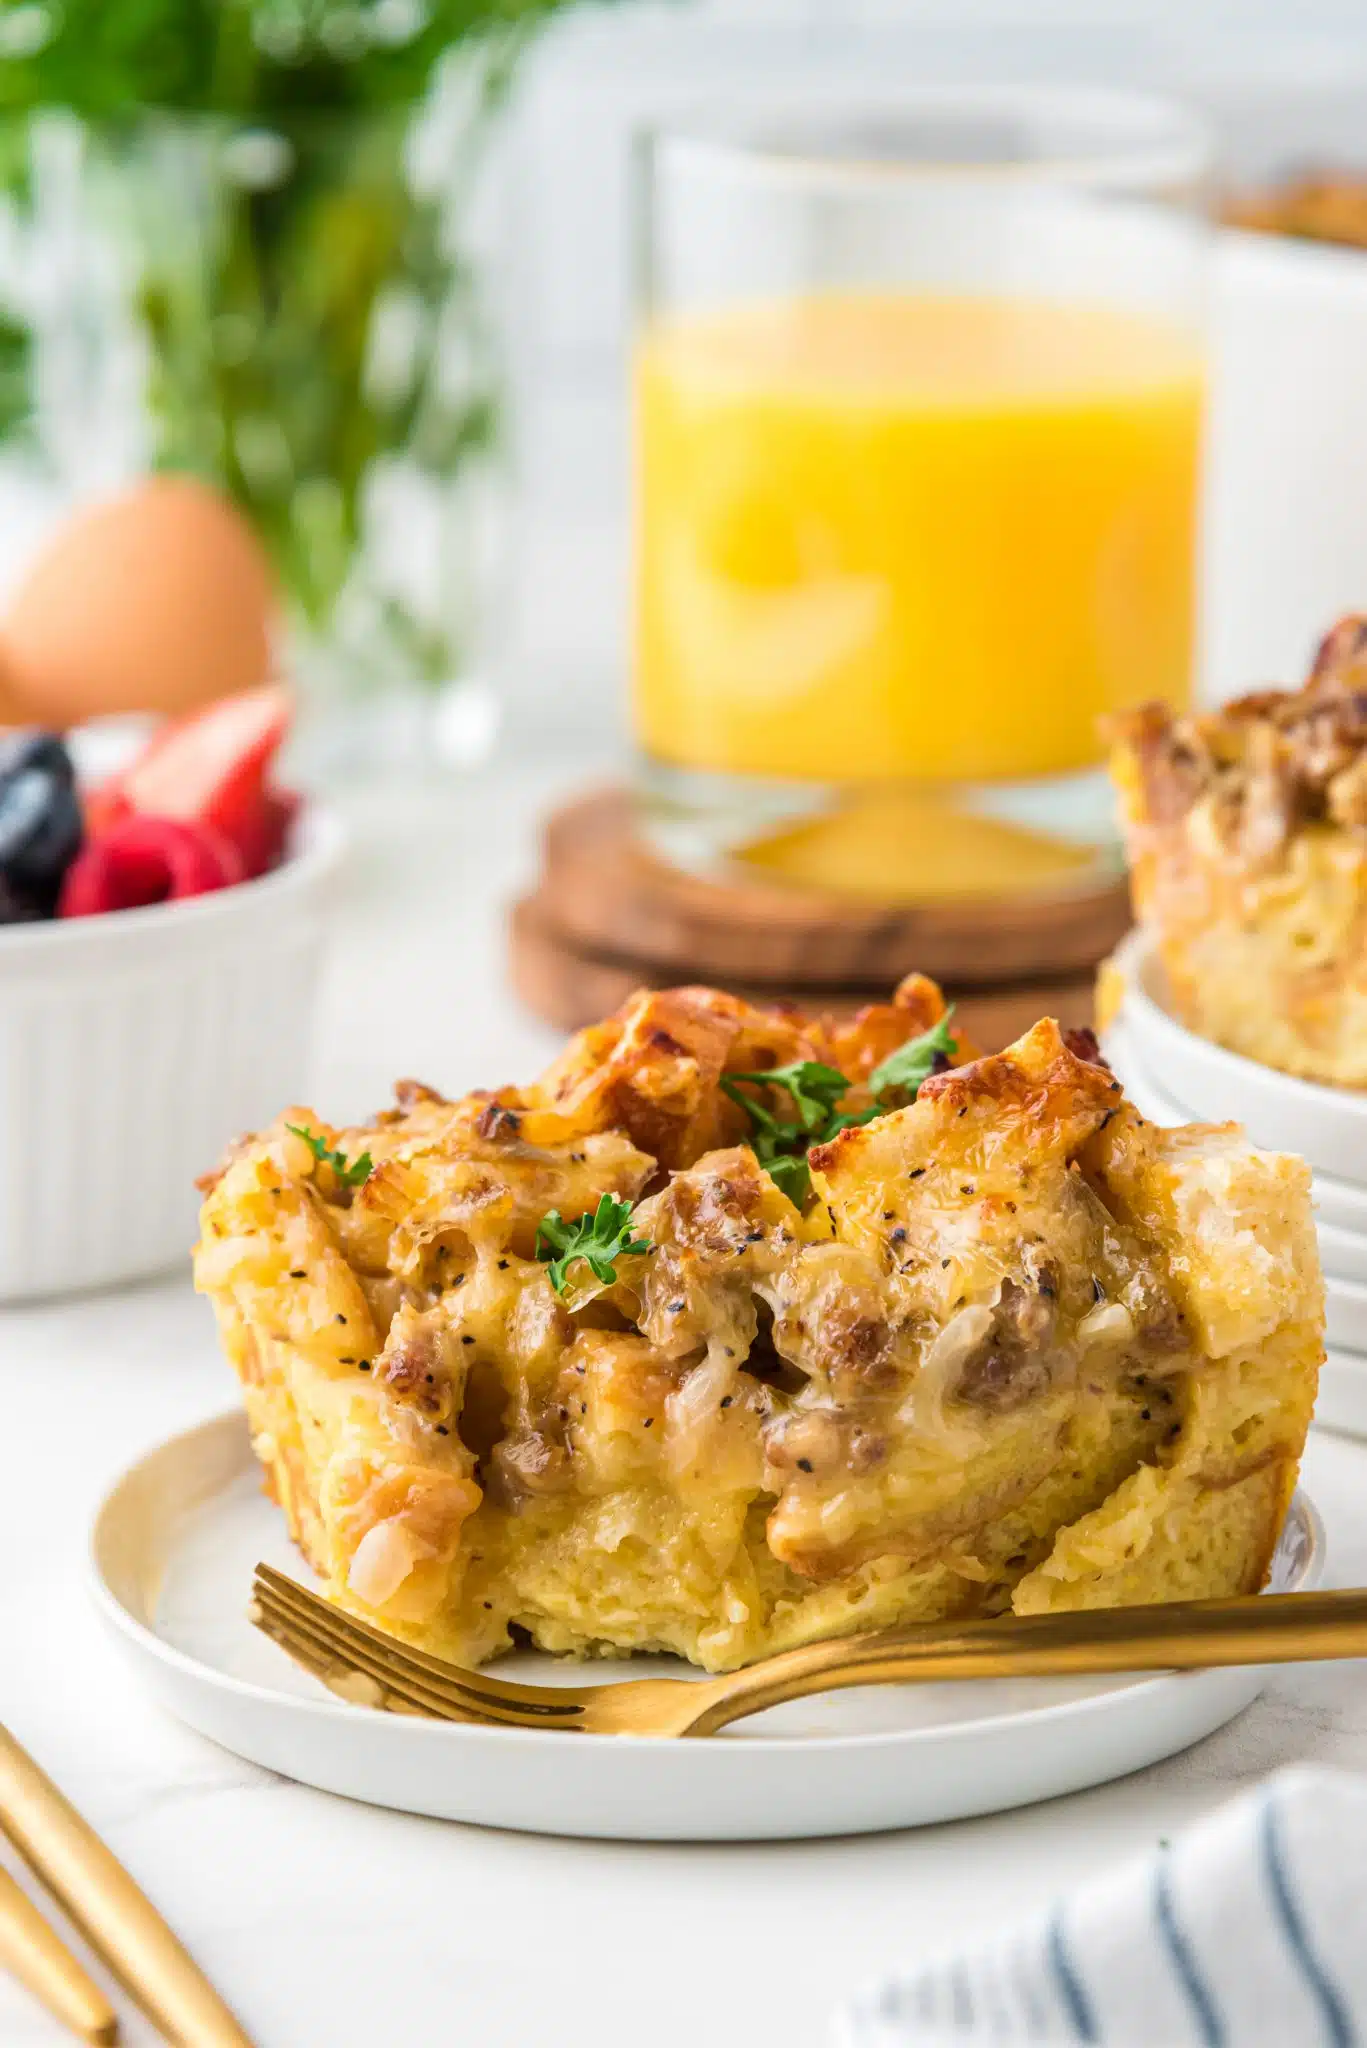 A protein-packed slice of breakfast casserole on a plate next to a cup of refreshing orange juice.